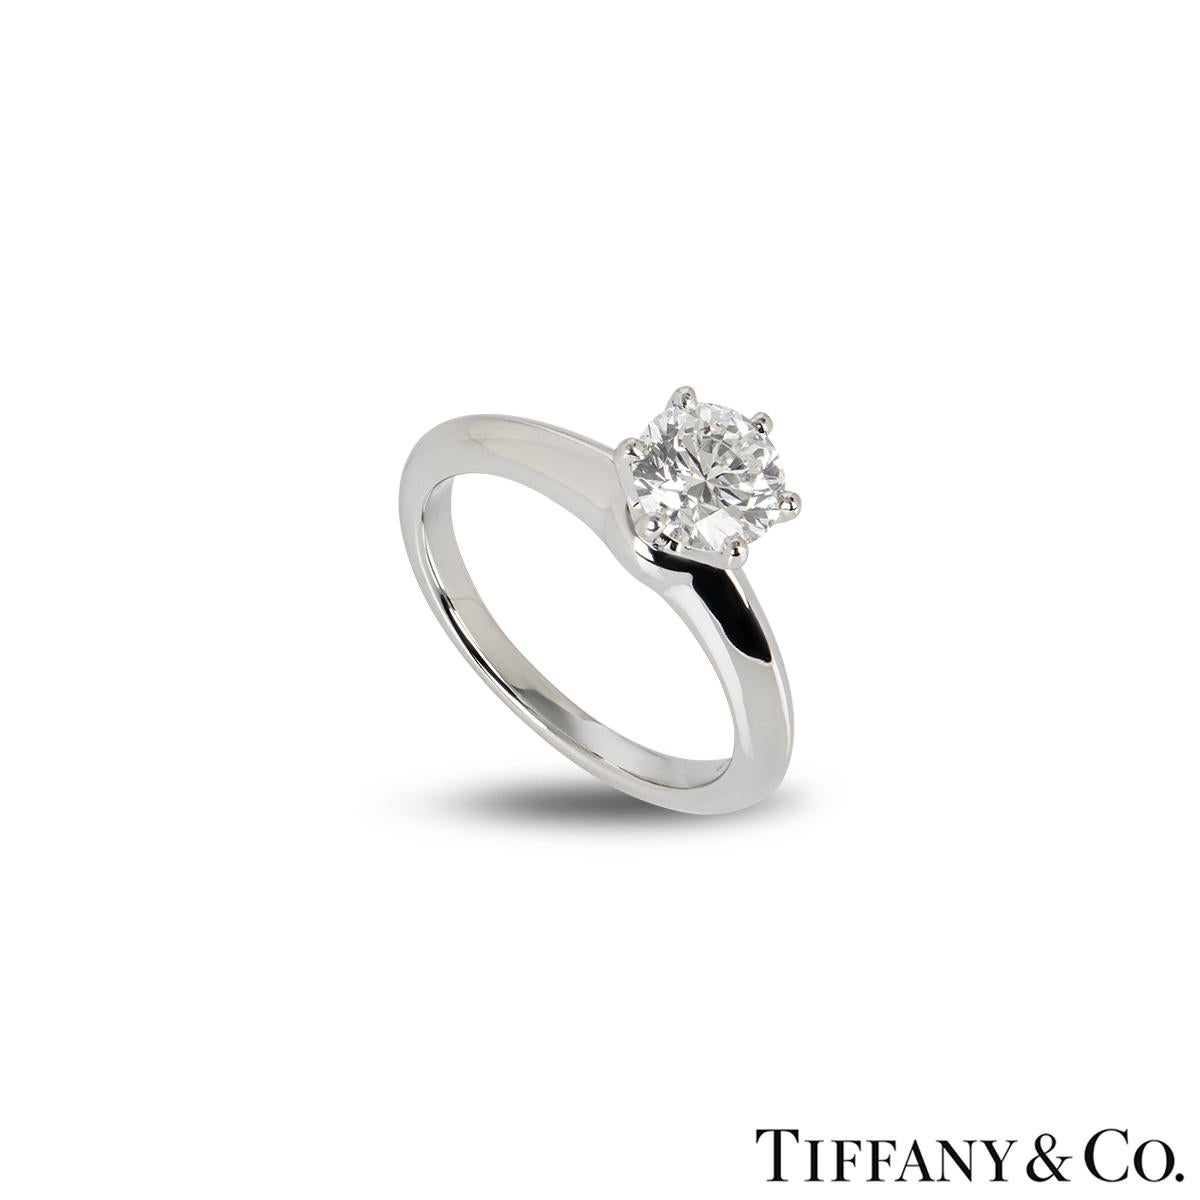 A stunning Tiffany & Co diamond ring in platinum from The Tiffany Setting collection. The ring comprises of a round brilliant cut diamond with a weight of 1.00ct, H colour and VVS1 clarity set in the iconic 6 claw setting. The diamond scores an